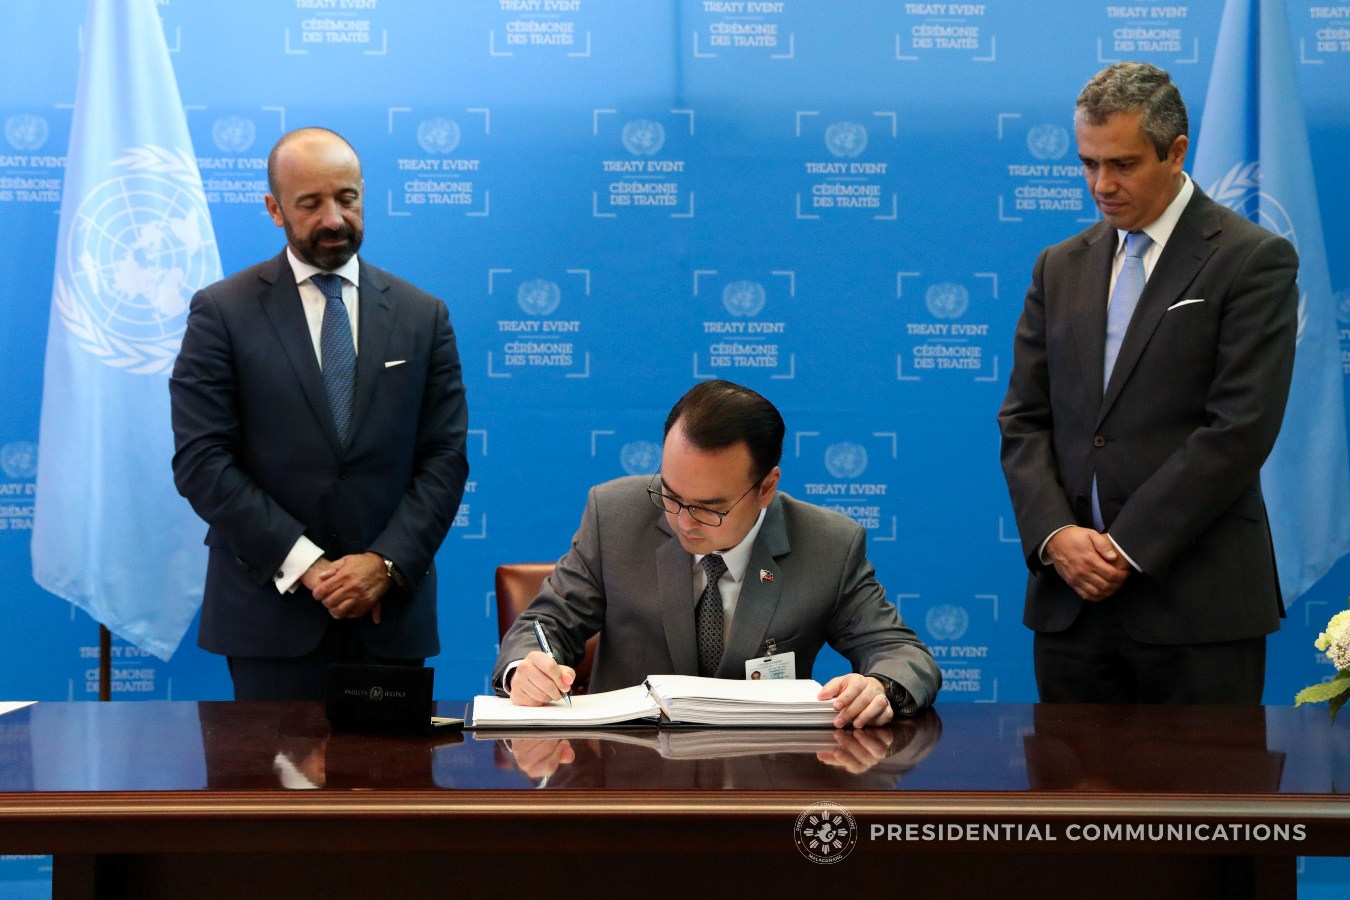 The Philippines represented by Foreign Affairs Secretary Alan Peter Cayetano signs the Treaty on the Prohibition of Nuclear Weapons at the United Nations headquarters in New York on 20 September 2017.